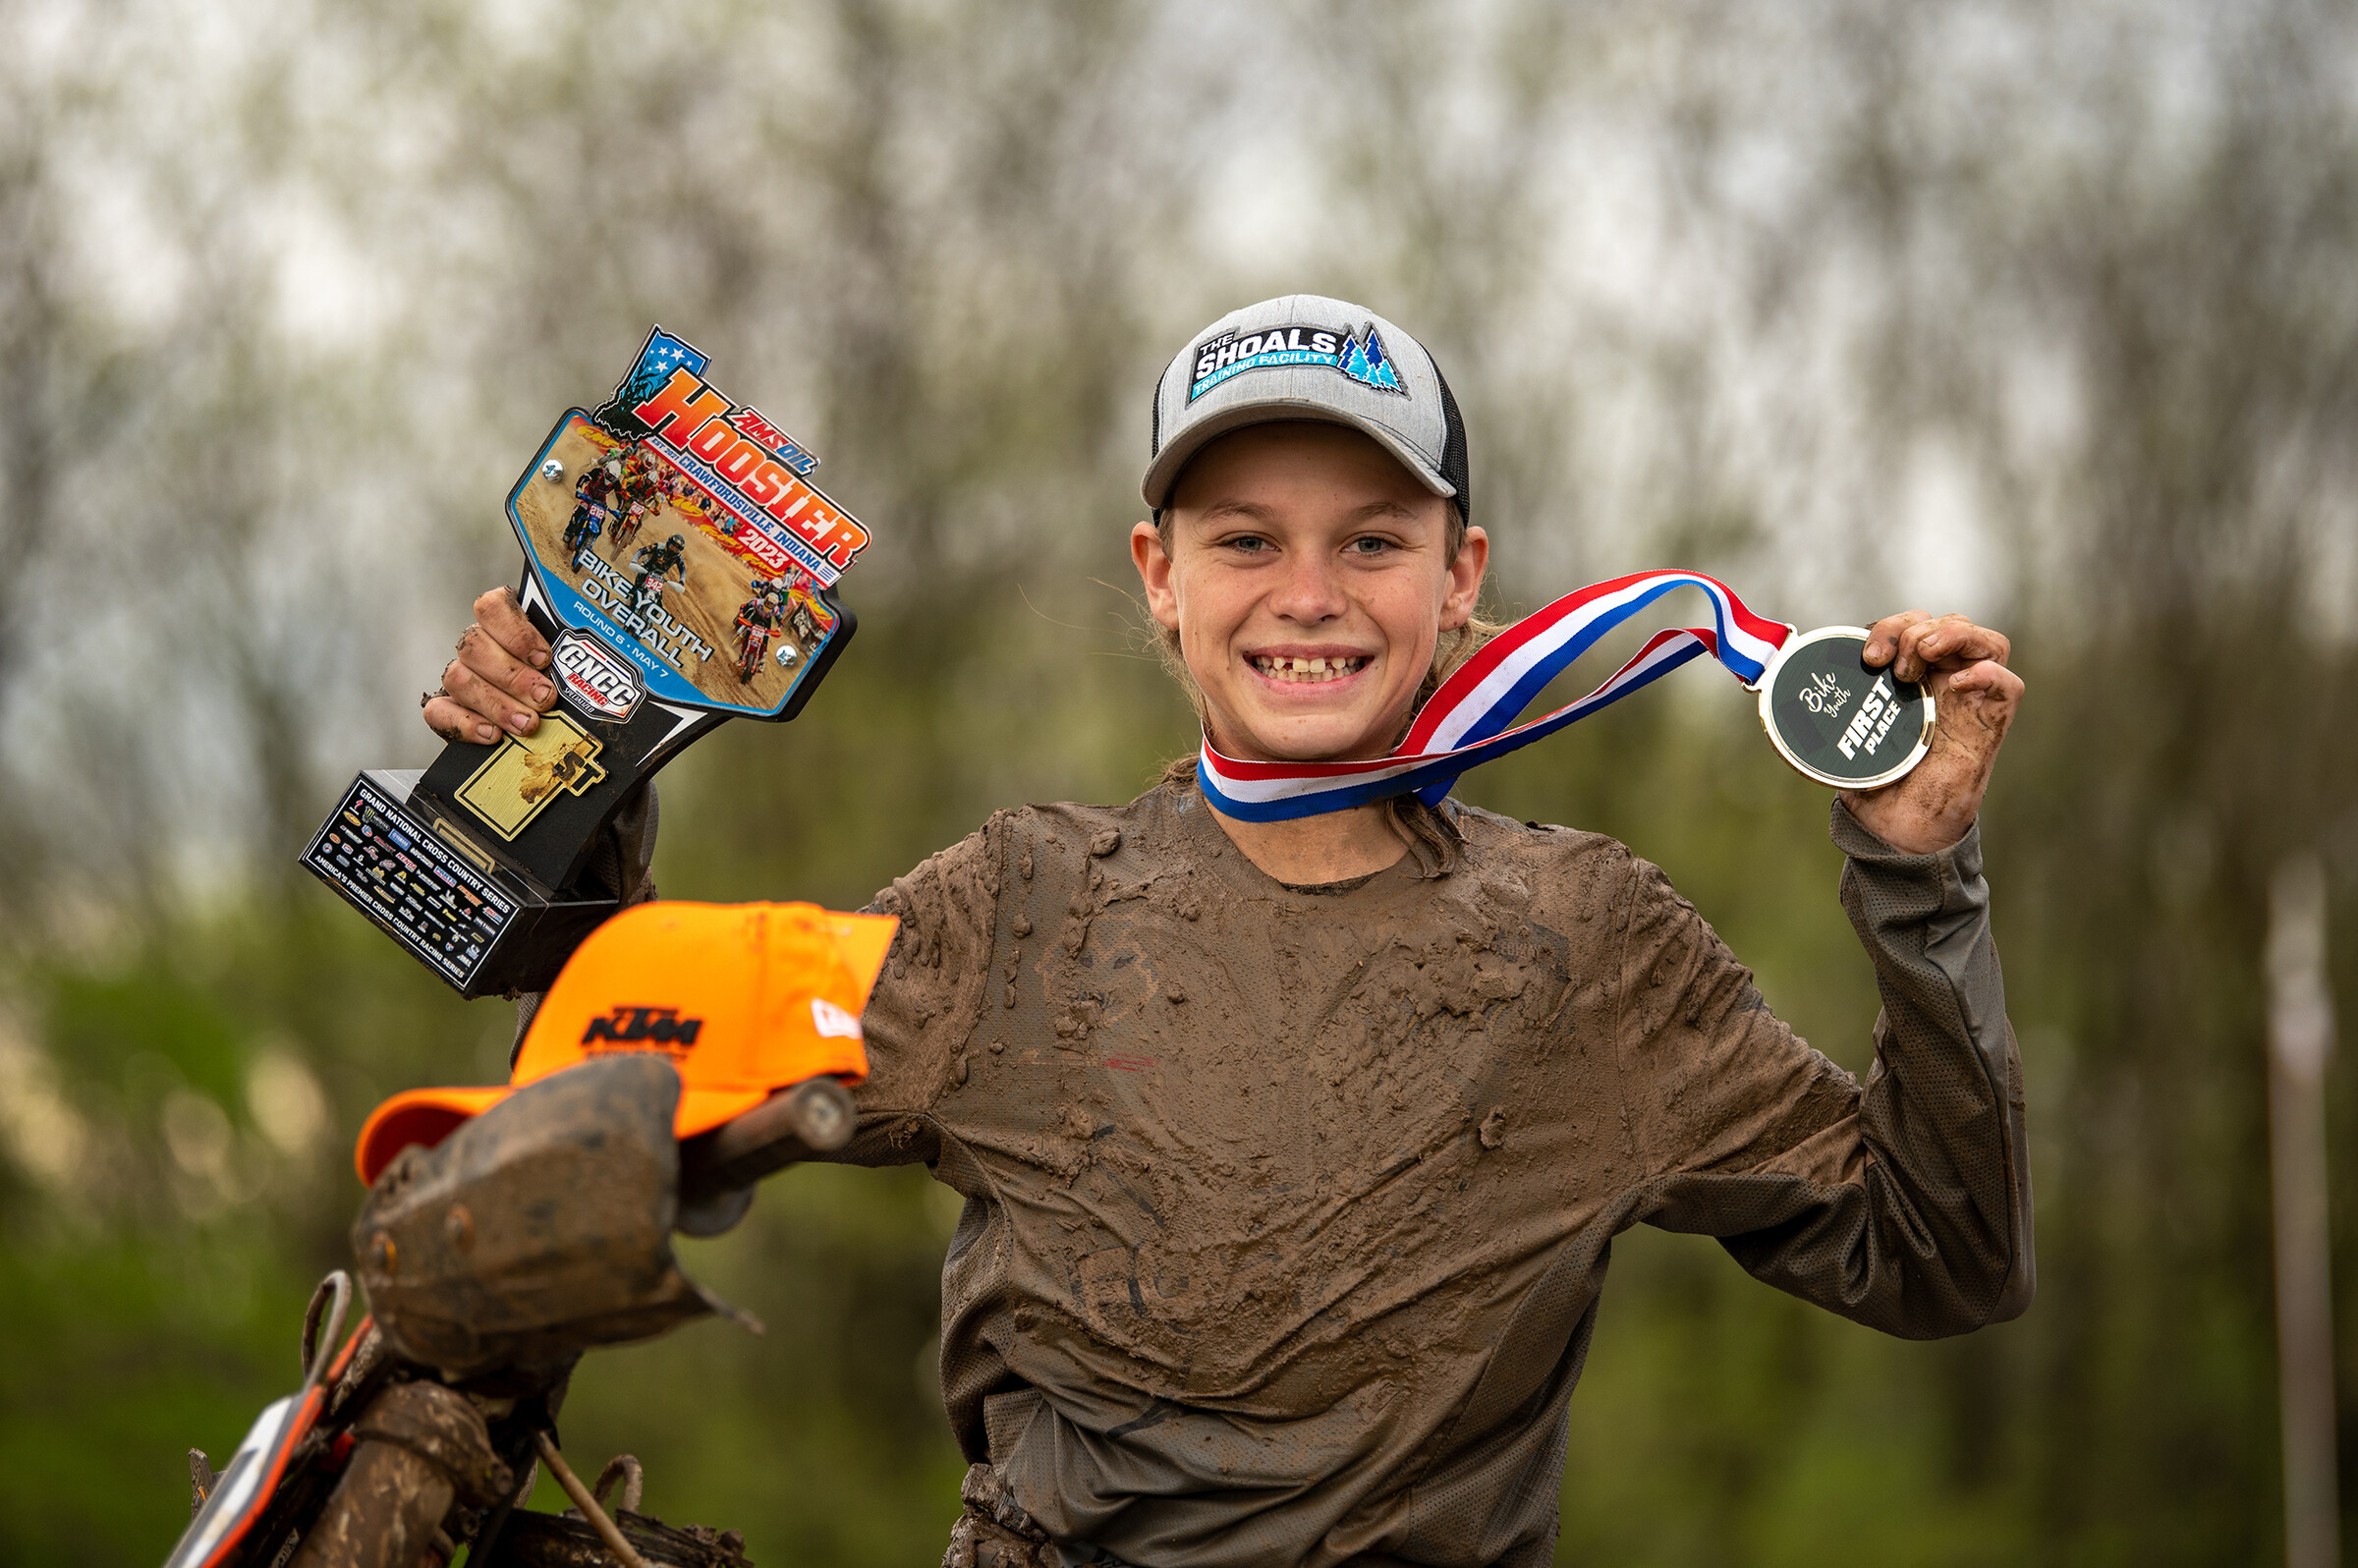 YXC2 Super Mini Jr. competitor, Caleb Wood earned the Youth Overall win on Sunday morning in Indiana.